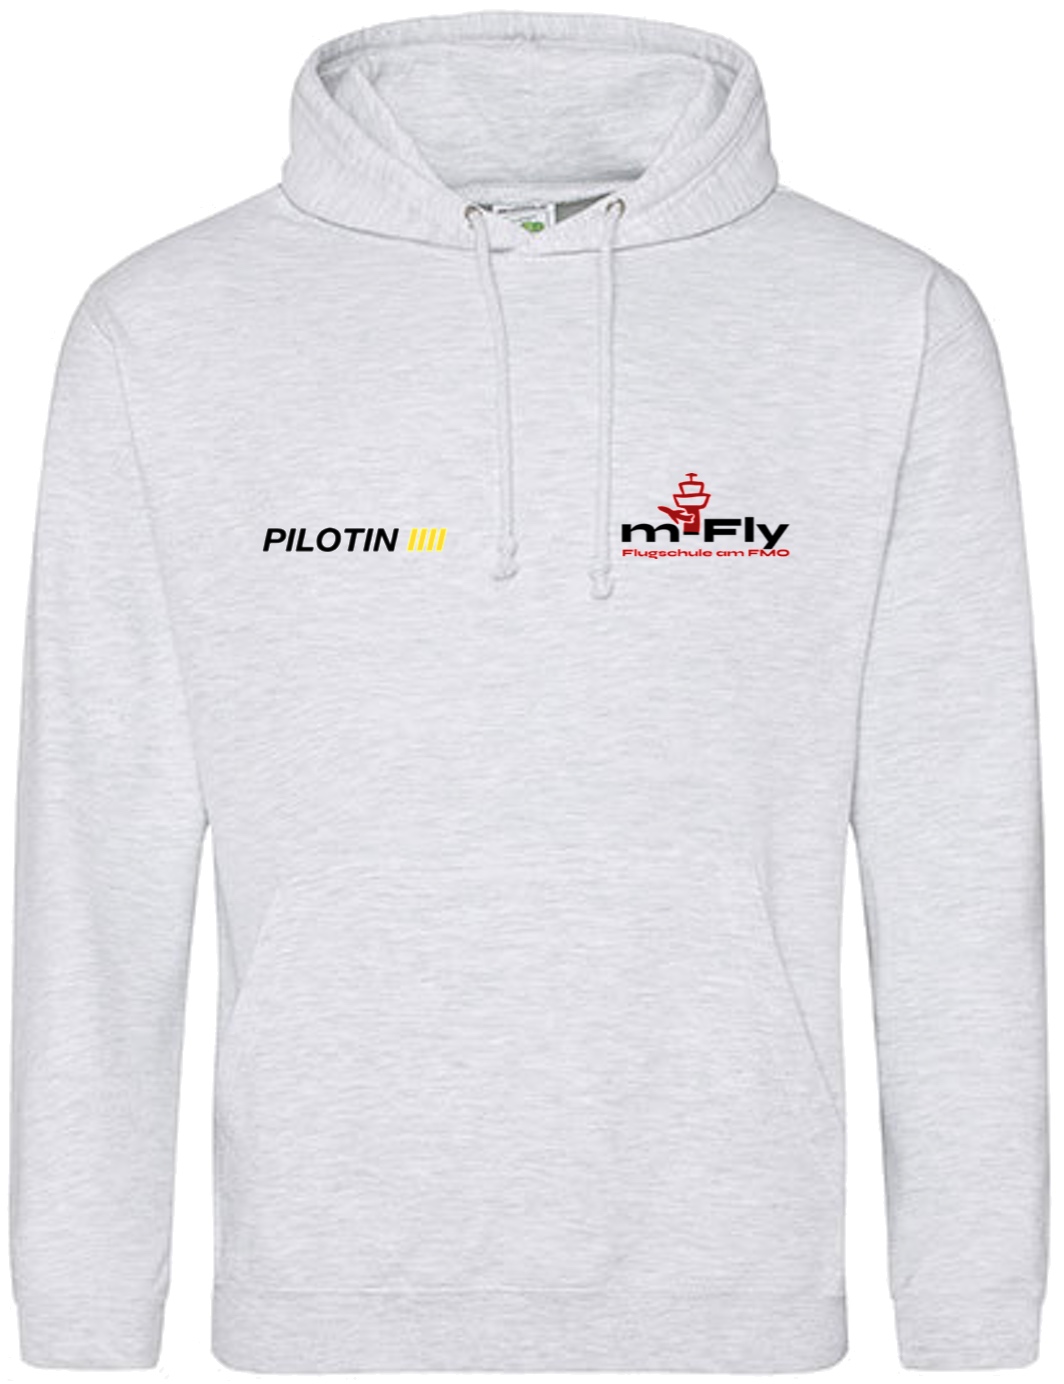 Hoodie "Pilots Edition" m-Fly